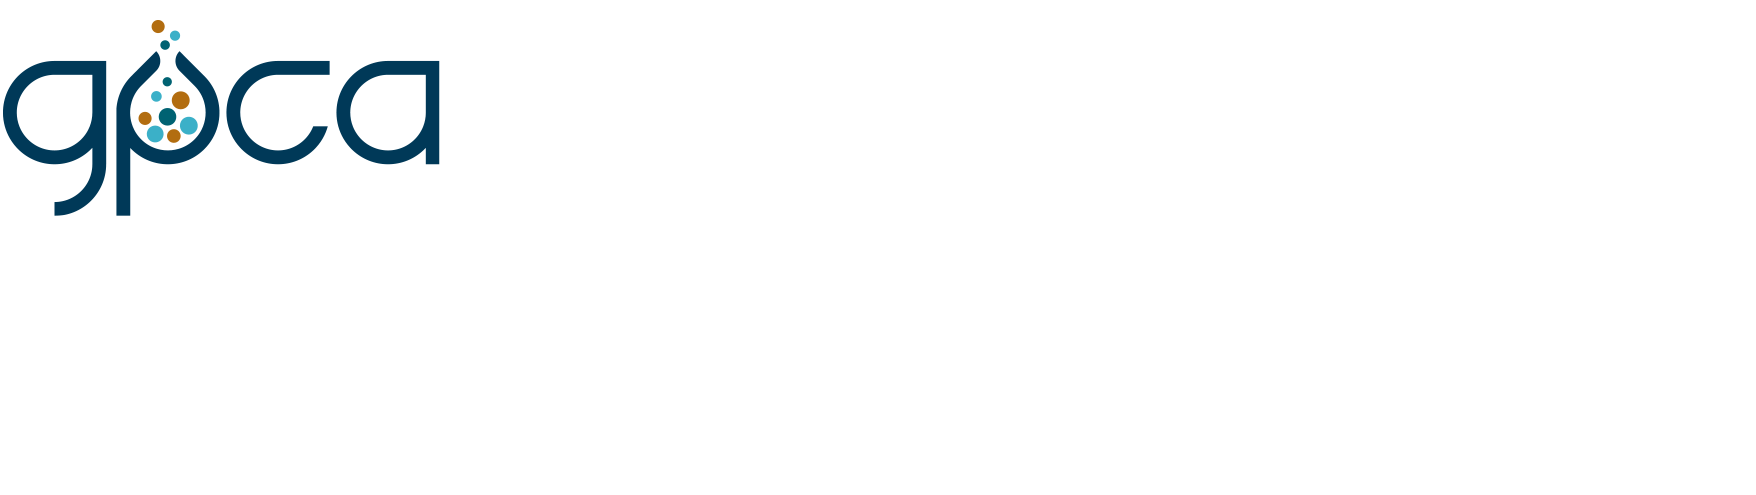 Member of Gulf Petrochemicals & Chemicals Association